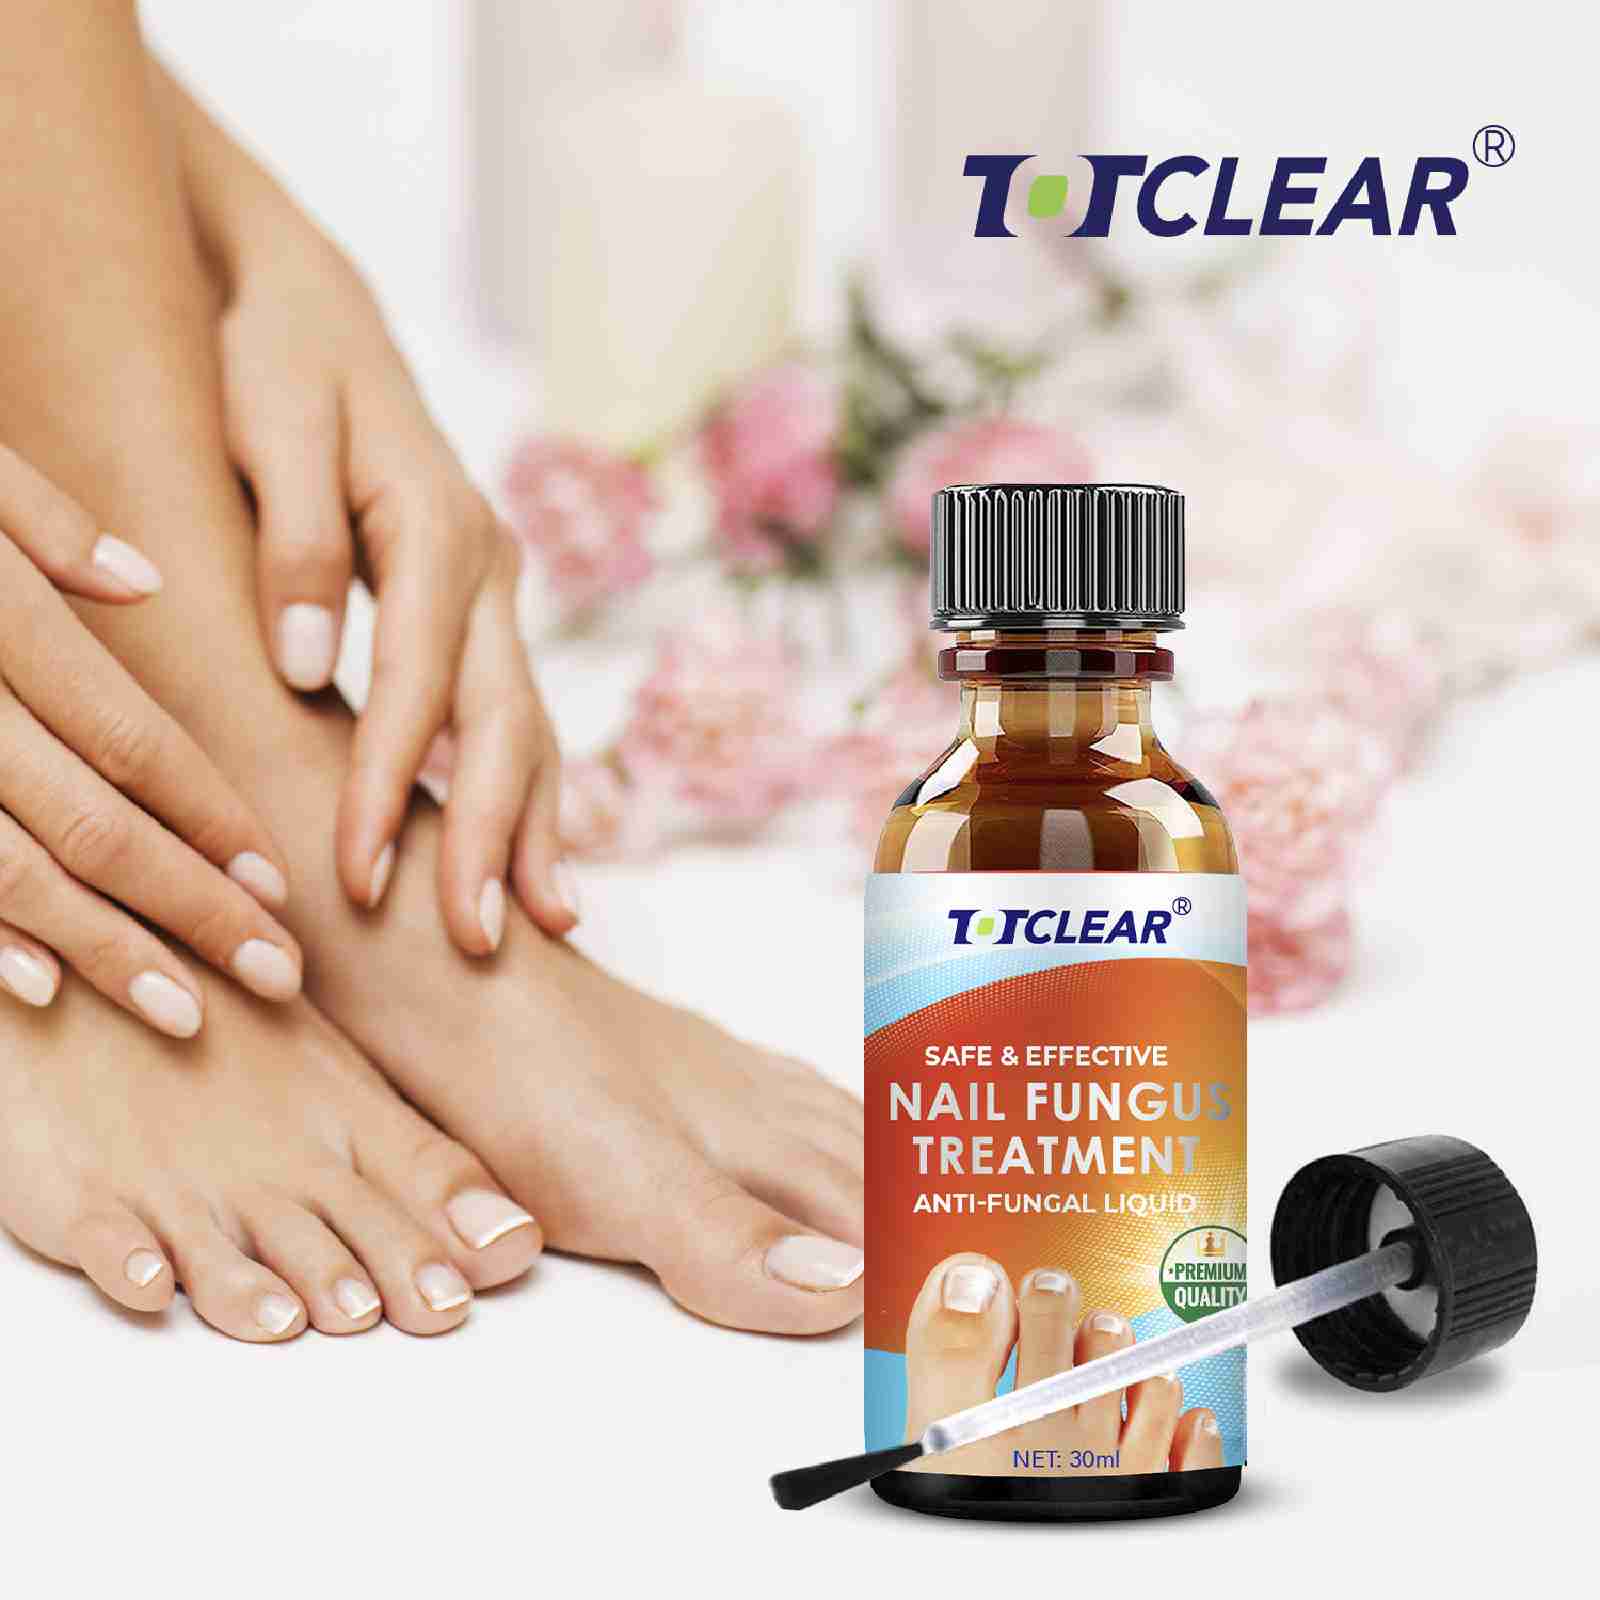 nail-fungus-treatment-for-toenail with discount code